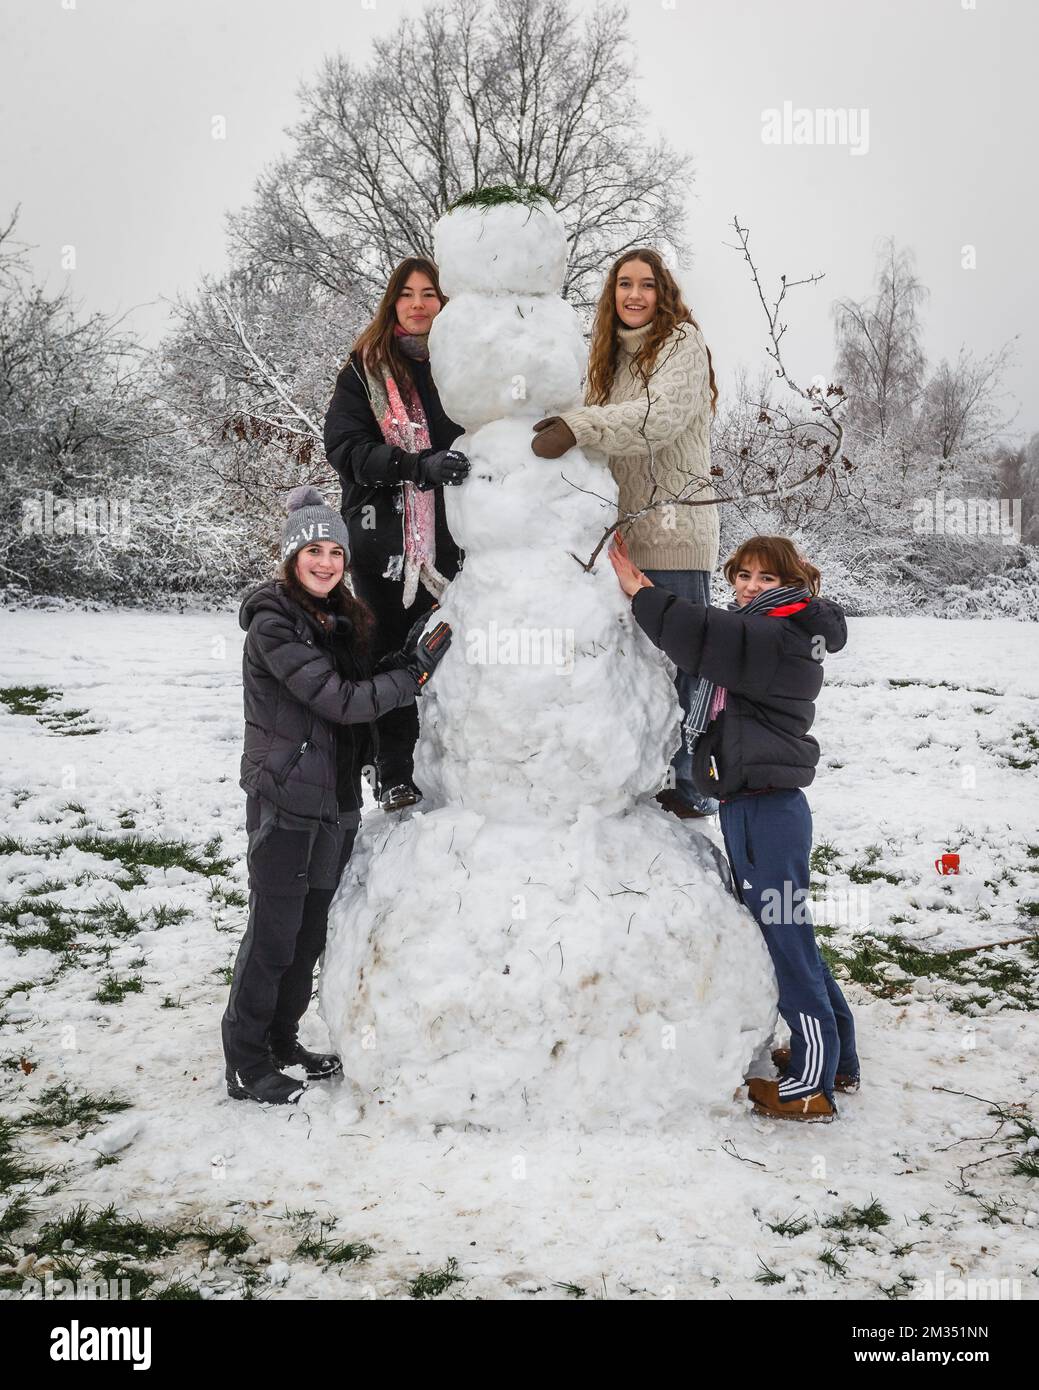 Two hours of snow fun for these teenagers in London's Hampstead to produce this giant snowman. Stock Photo